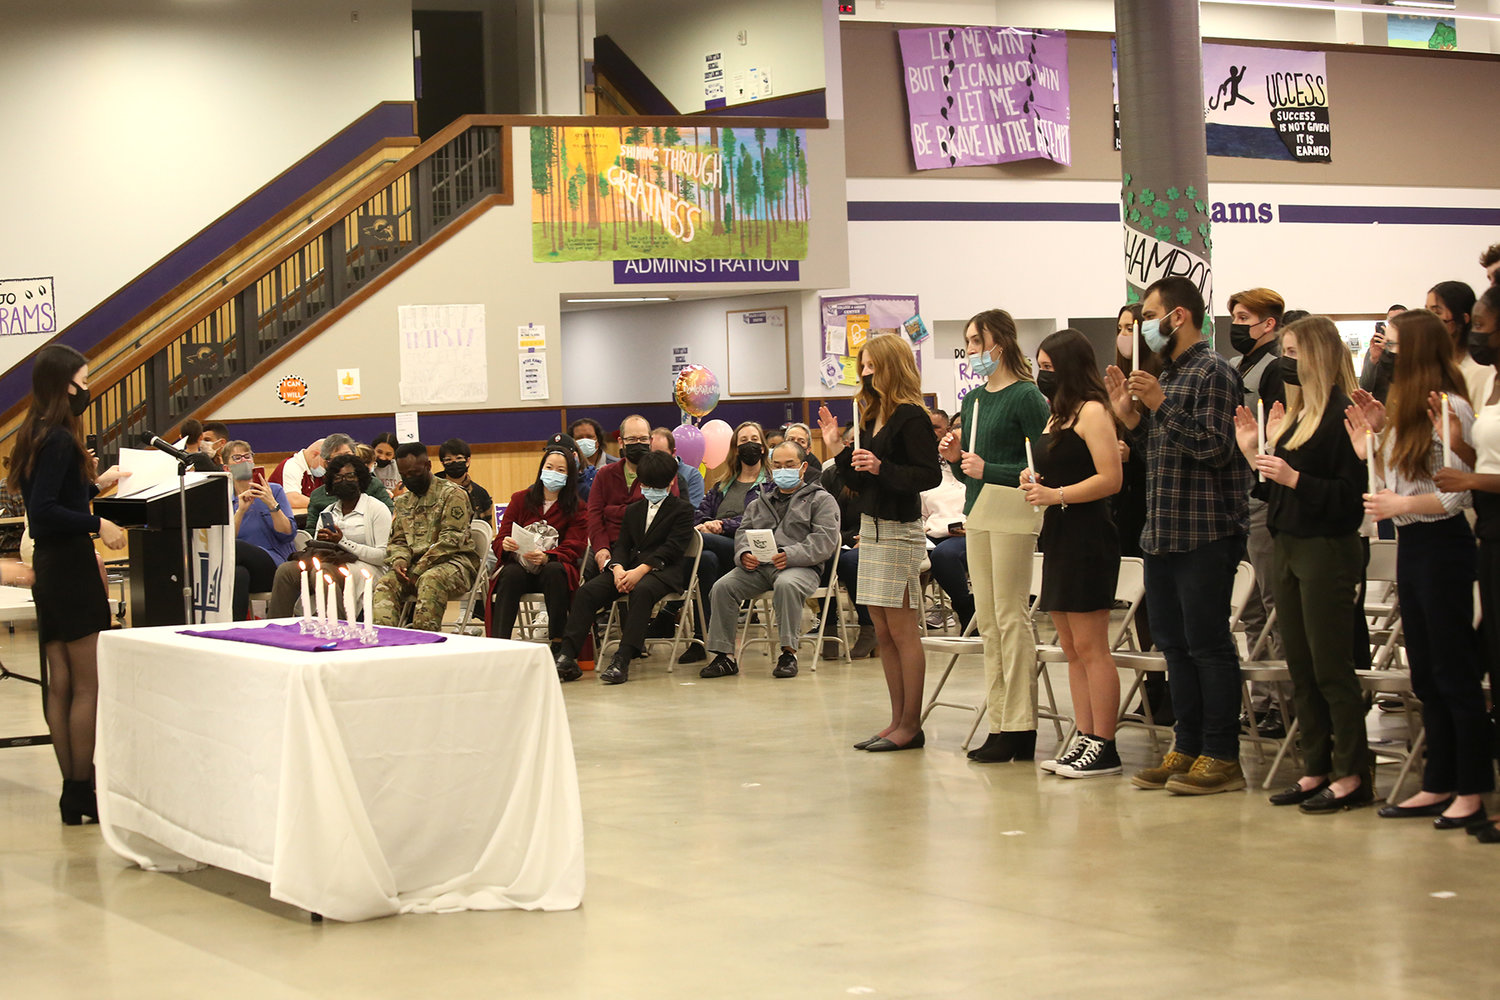 Parents of the inductees, seated on the left, watch on as their children are inducted by a National Honor Society officer.